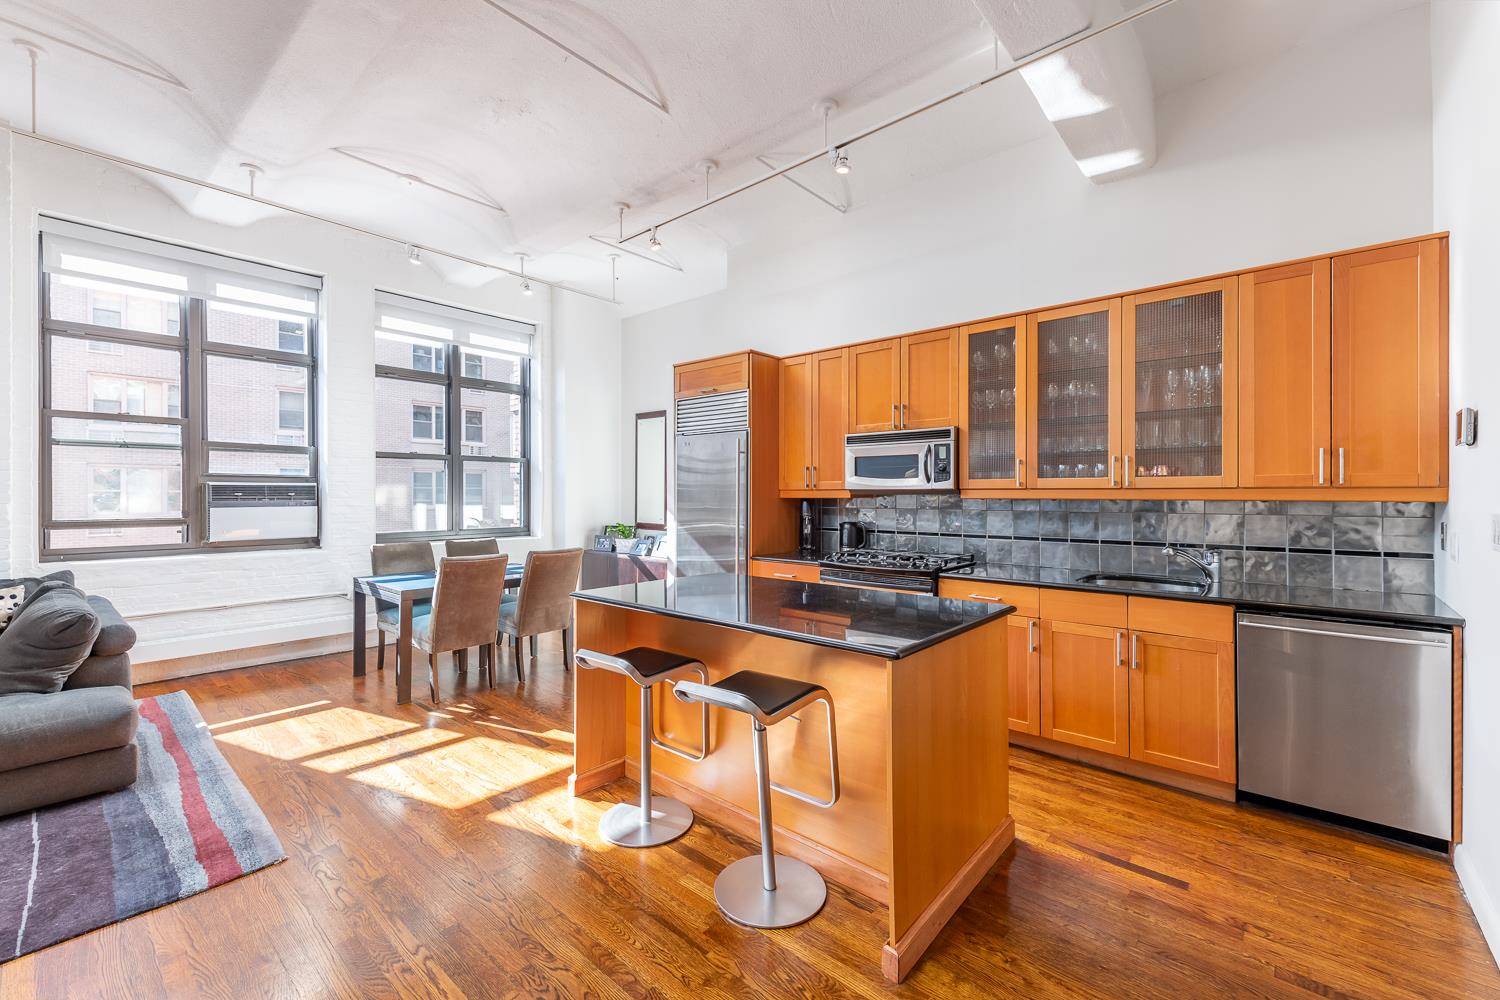 Dramatic renovated pre war loft beauty featuring 12' barrel vaulted ceilings, oversized thermopane windows, hardwood flooring and exposed brick.